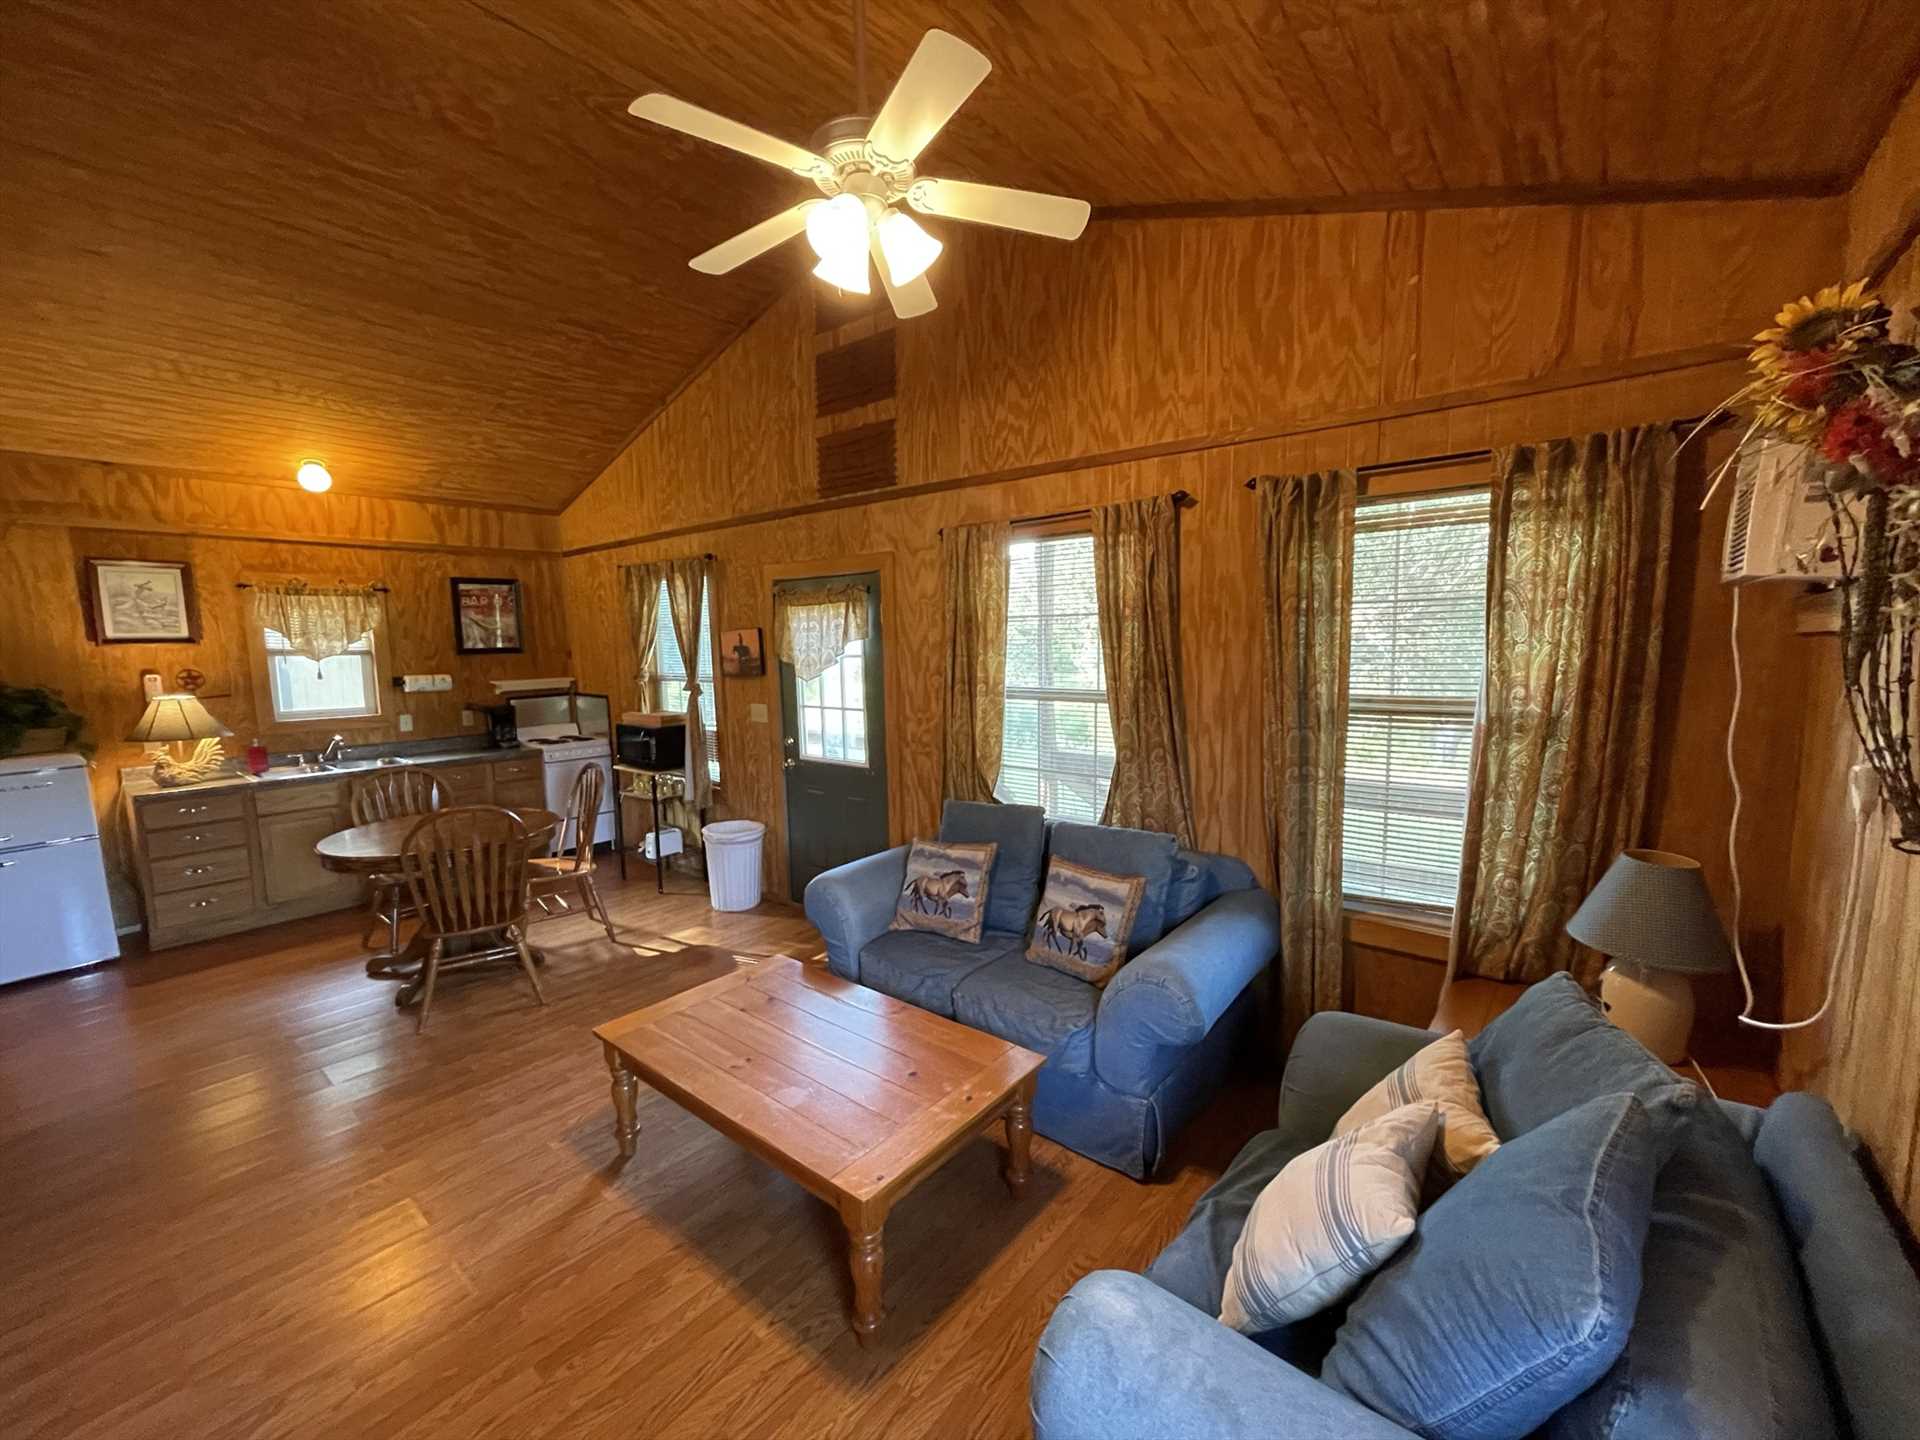                                                 Plenty of leg-stretchin' space greets your folks at the Lone Star Cabin, including a full kitchen, dining table, and warm and welcoming living area furniture!